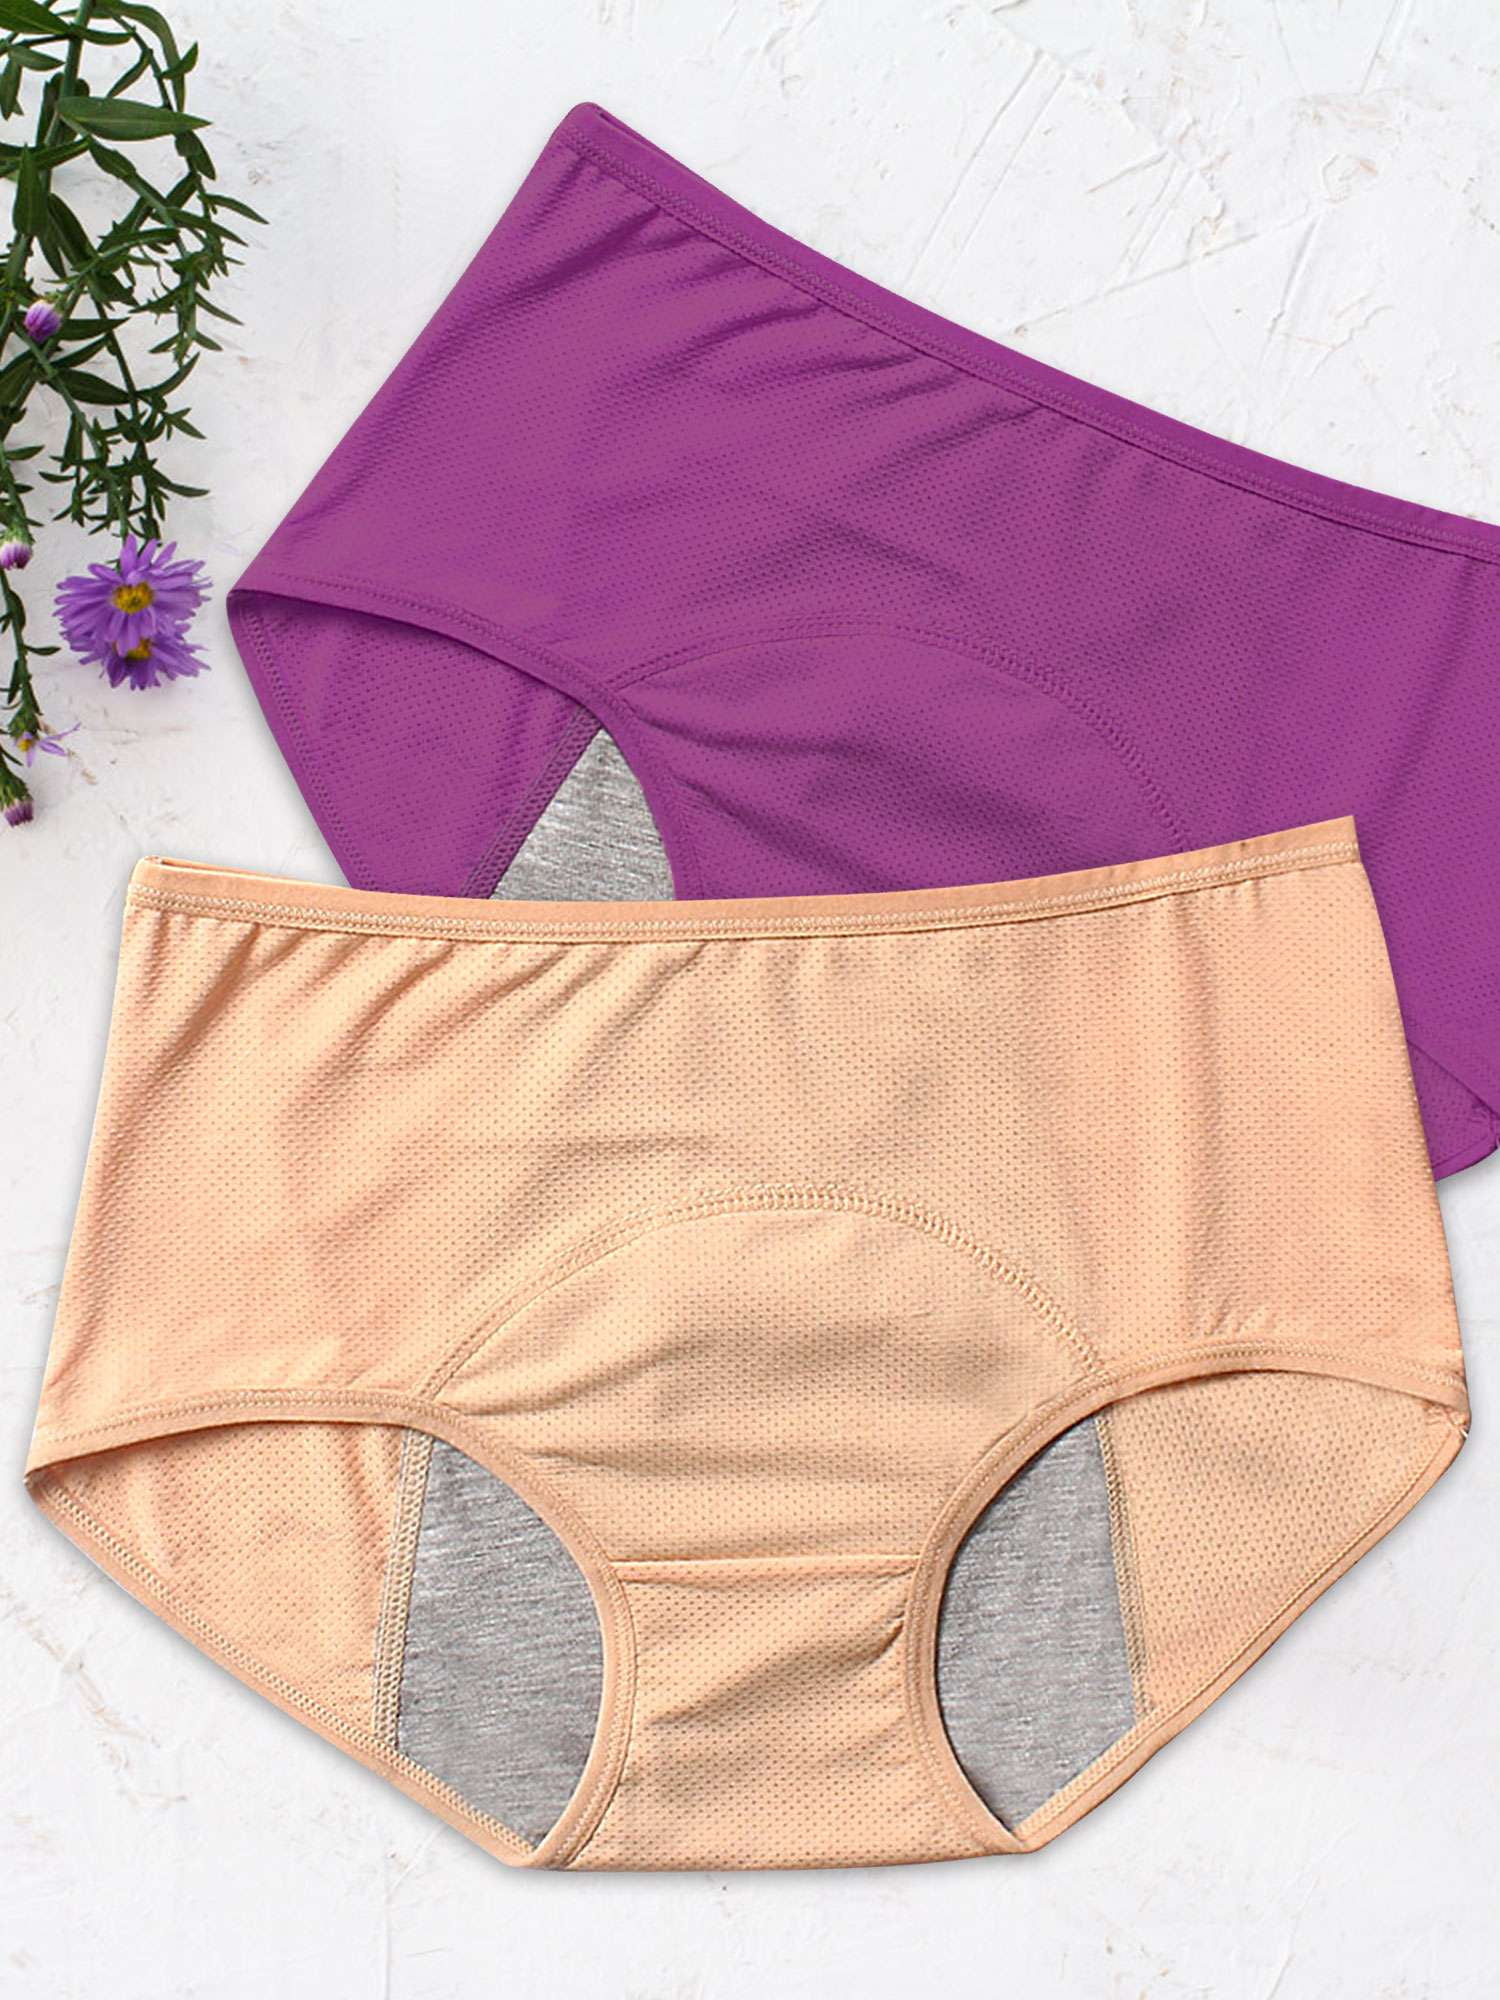 PULLIMORE 4 Pack Period Underwear for Women Mid Waist Leakproof Unides Soft  Comfortable Panties Menstrual Brief (Apricot,S)